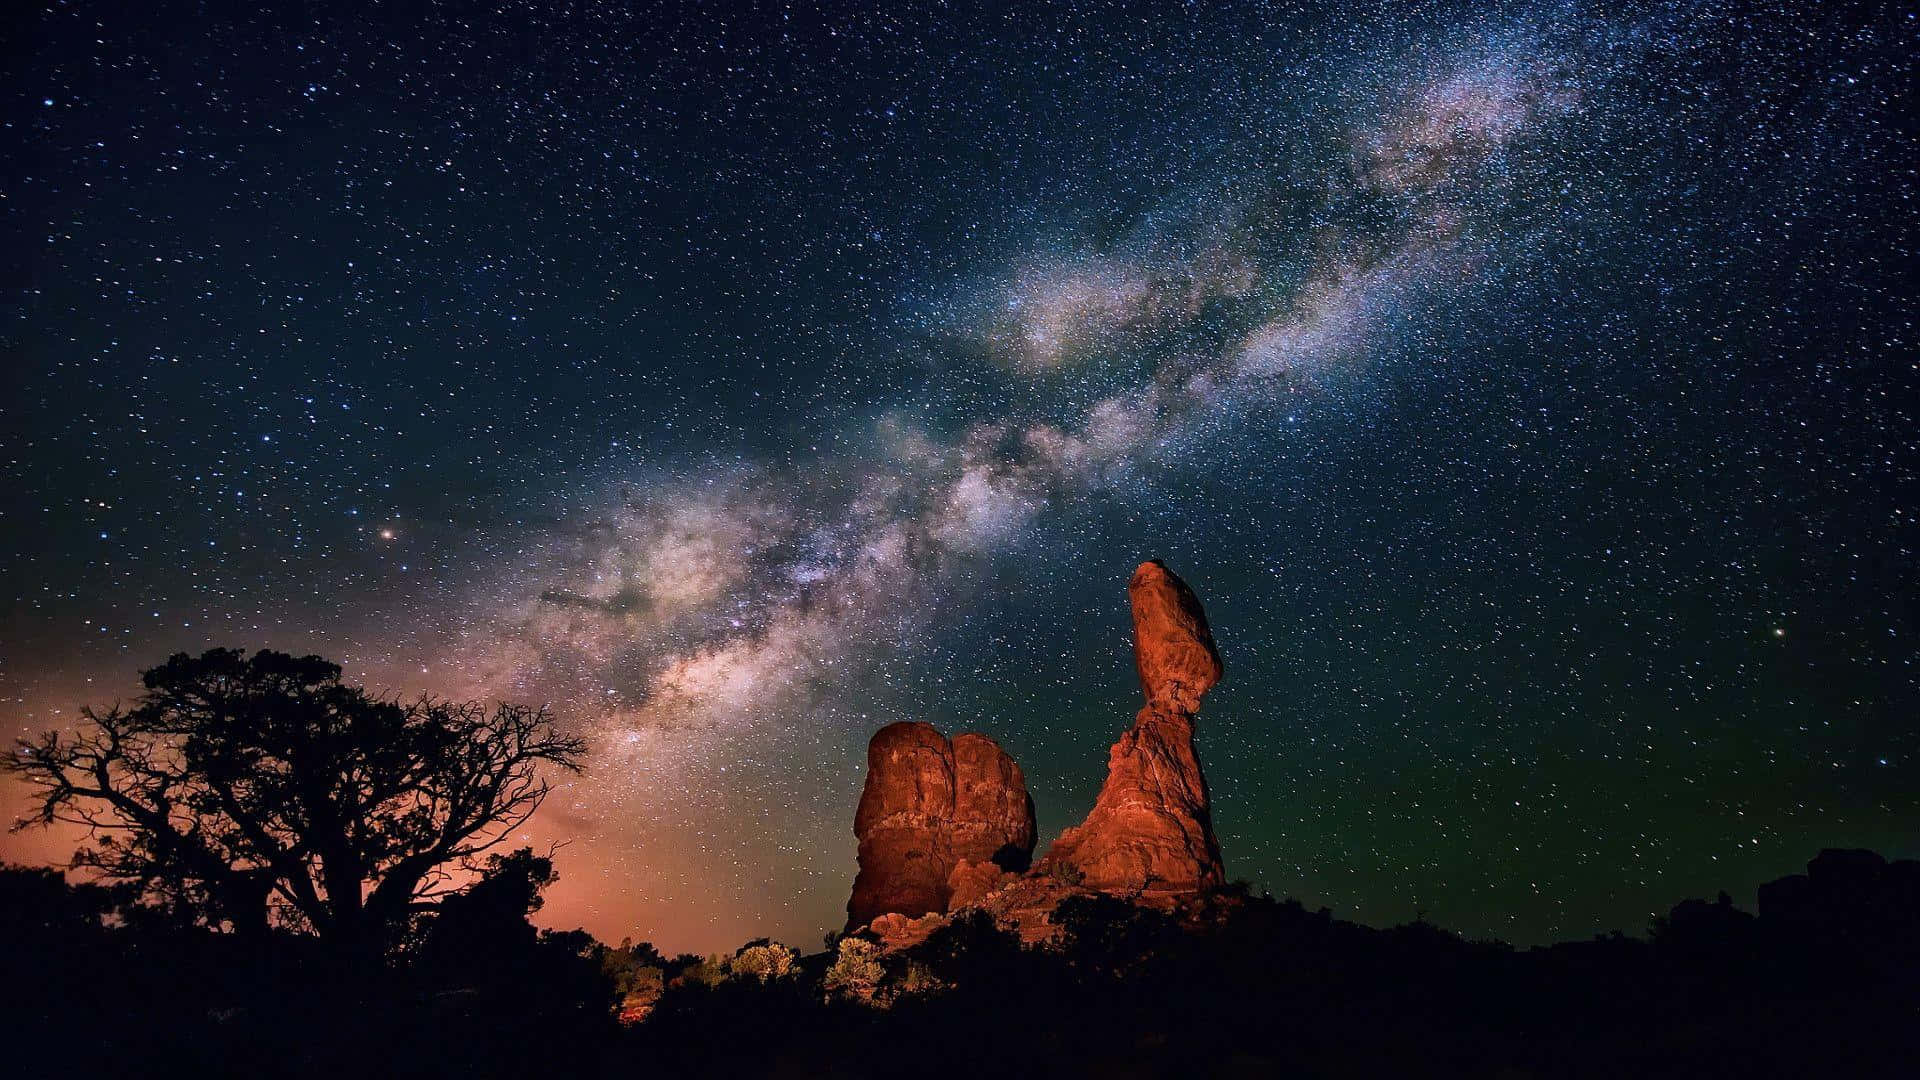 Enjoy a mesmerising view of the night sky, with the Milky Way visible.